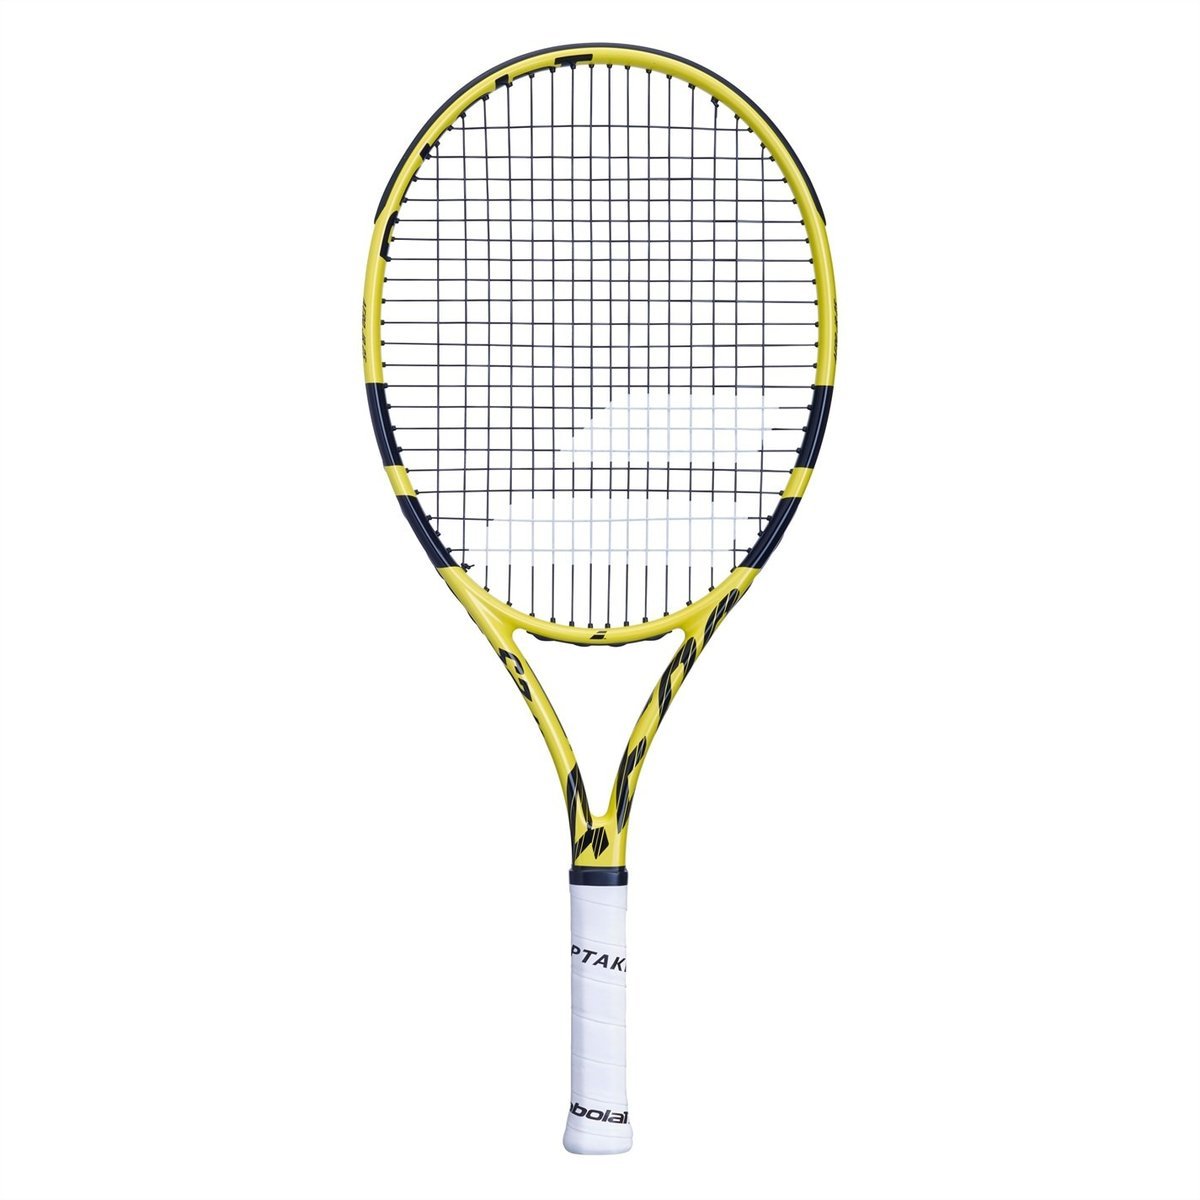 All Babolat items